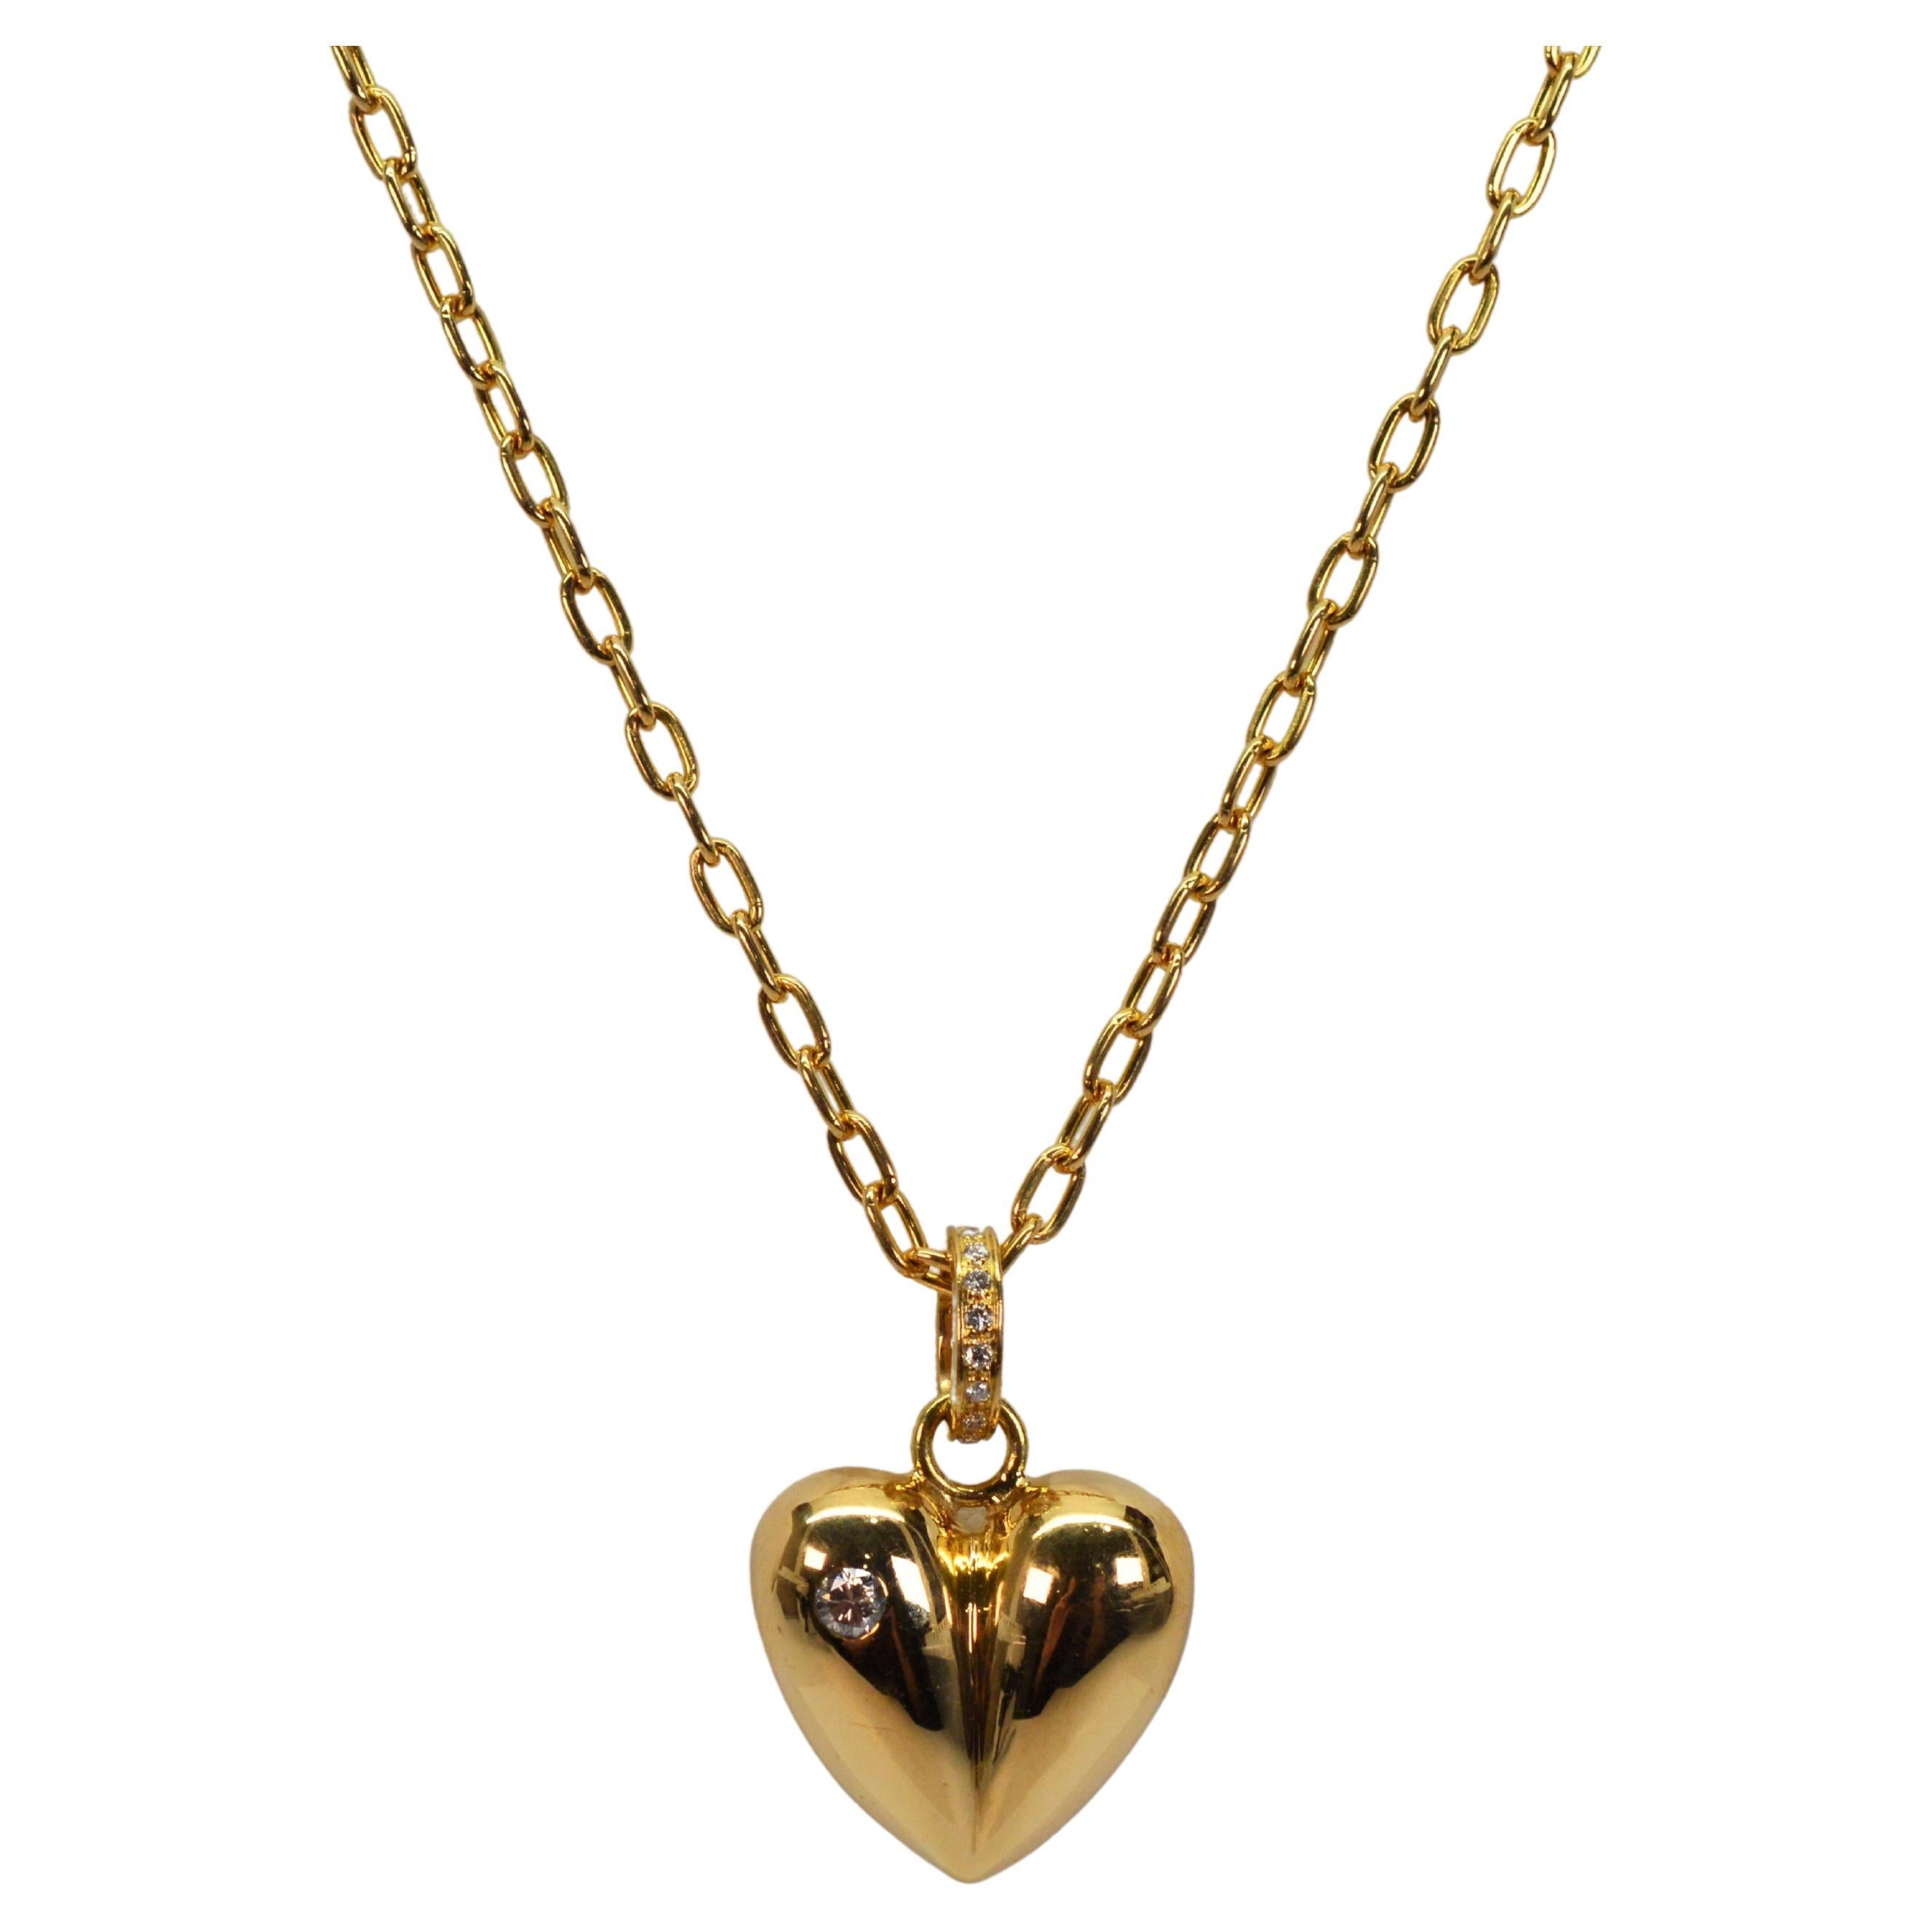 With a full heart, plump in 18 karat yellow gold, this beautifully appointed pendant has two bezel set diamond accents, one each .05 carat diamonds on each side of this lovely heart charm.
Elegantly suspend by a diamond encrusted gold bail covered